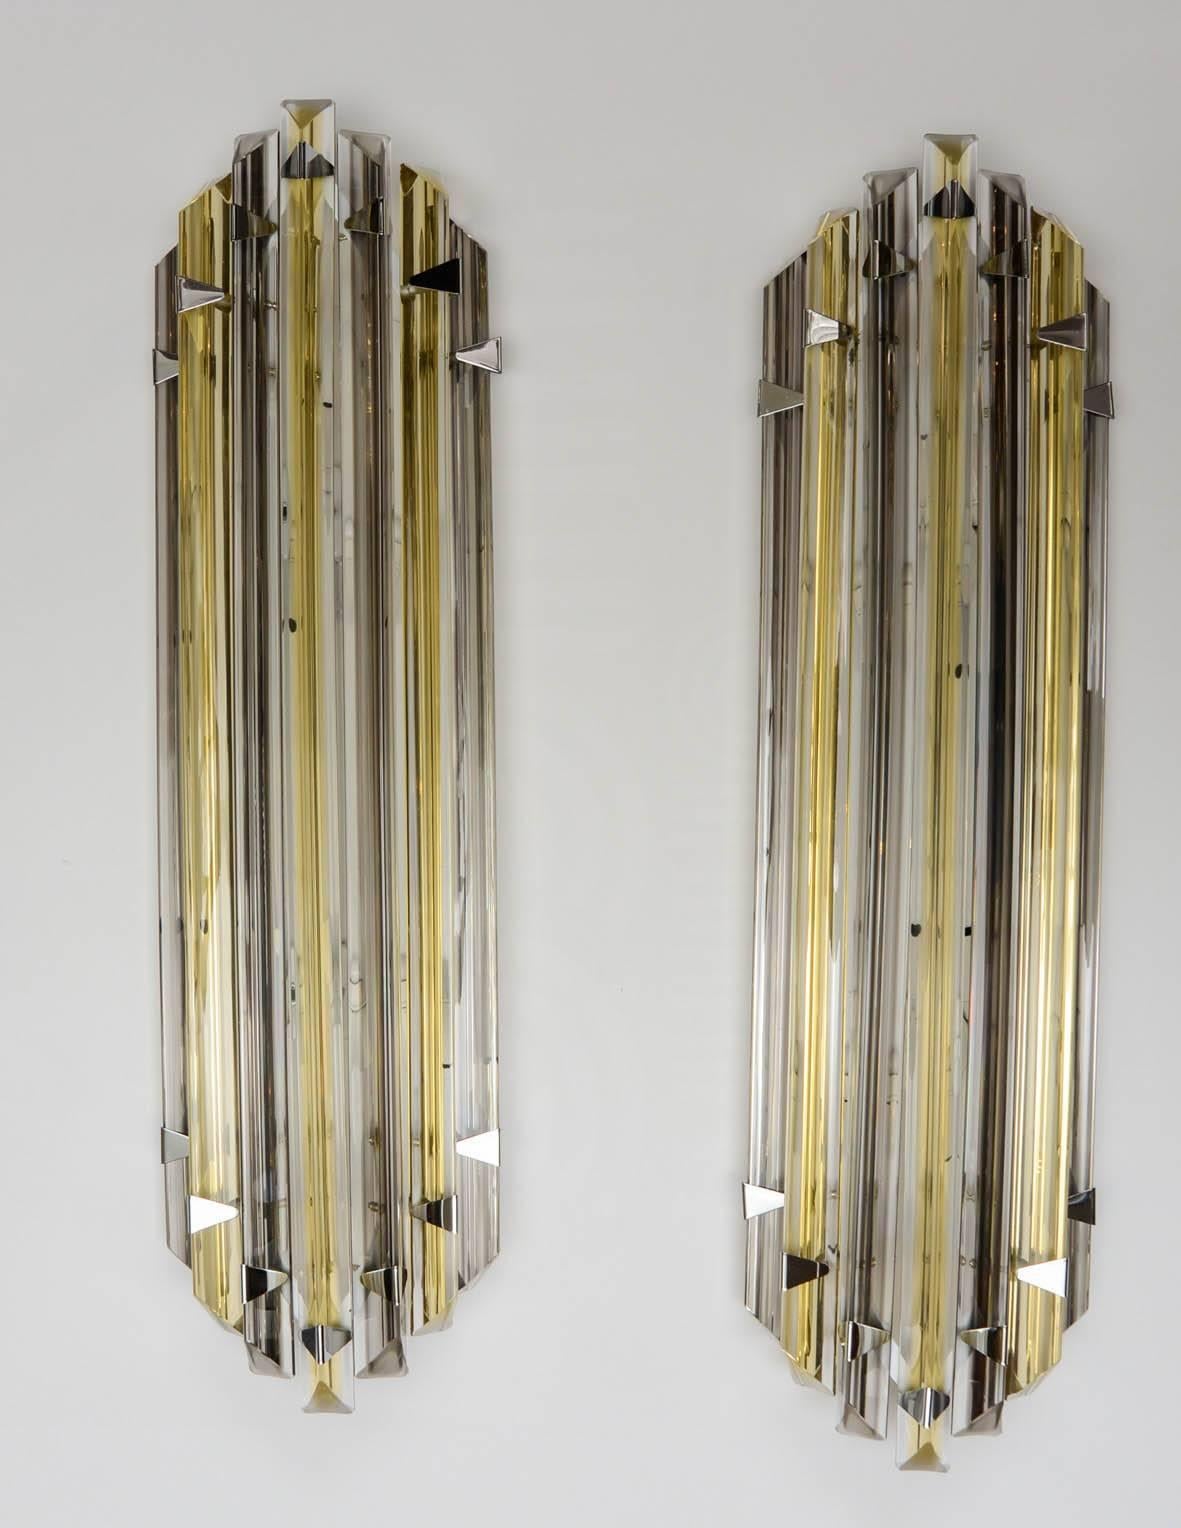 Pair of wall sconces in Murano glass.